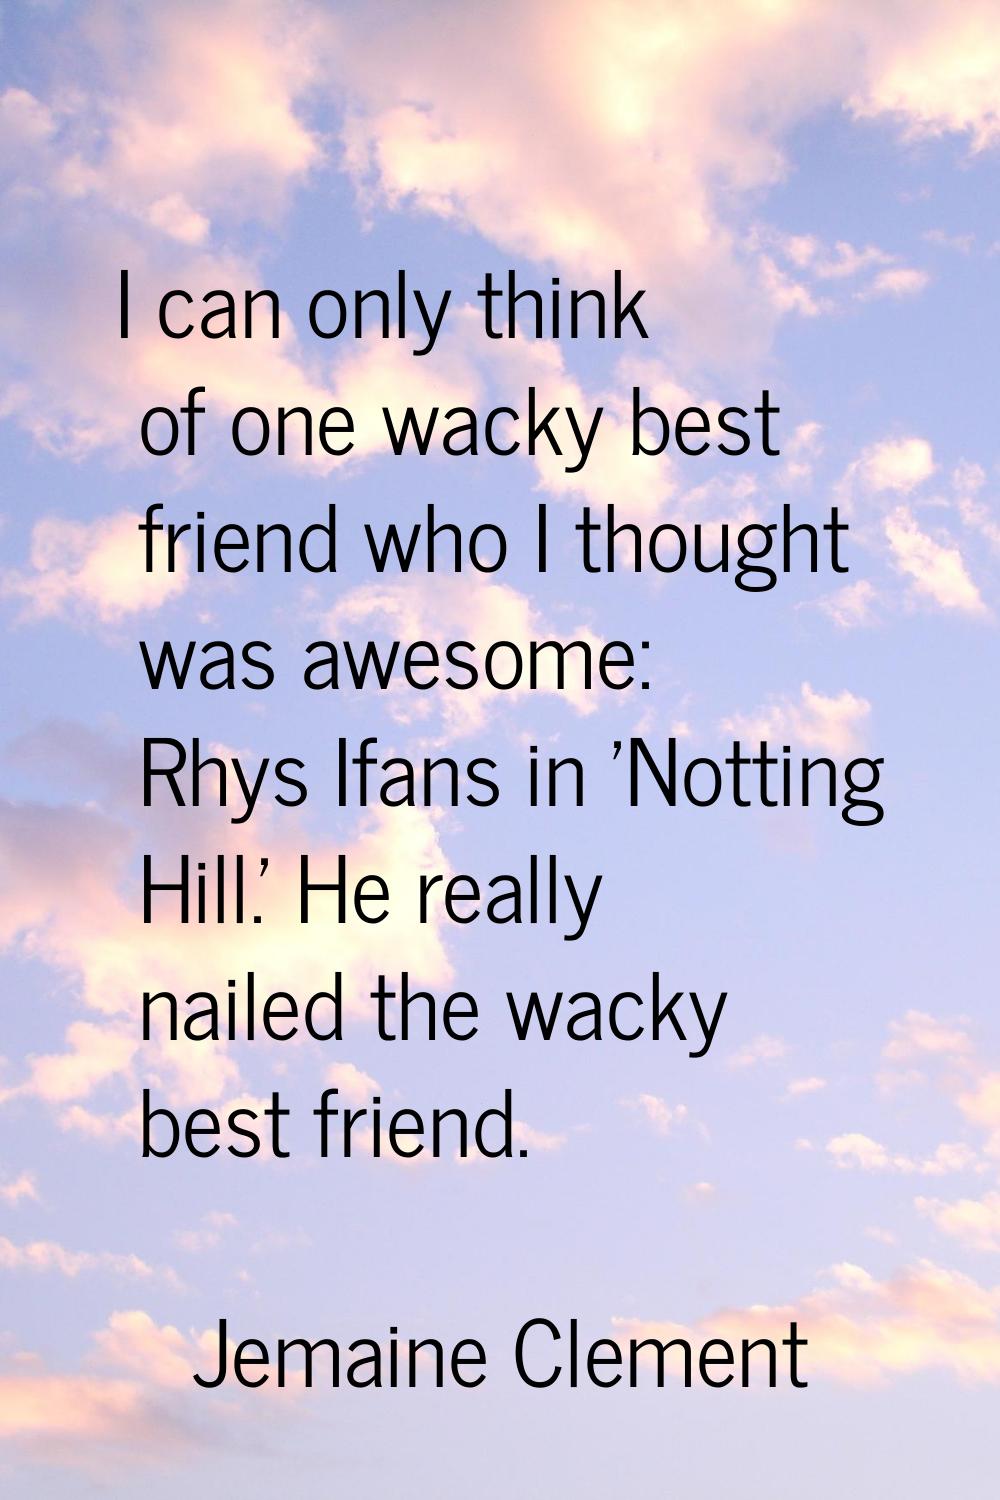 I can only think of one wacky best friend who I thought was awesome: Rhys Ifans in 'Notting Hill.' 